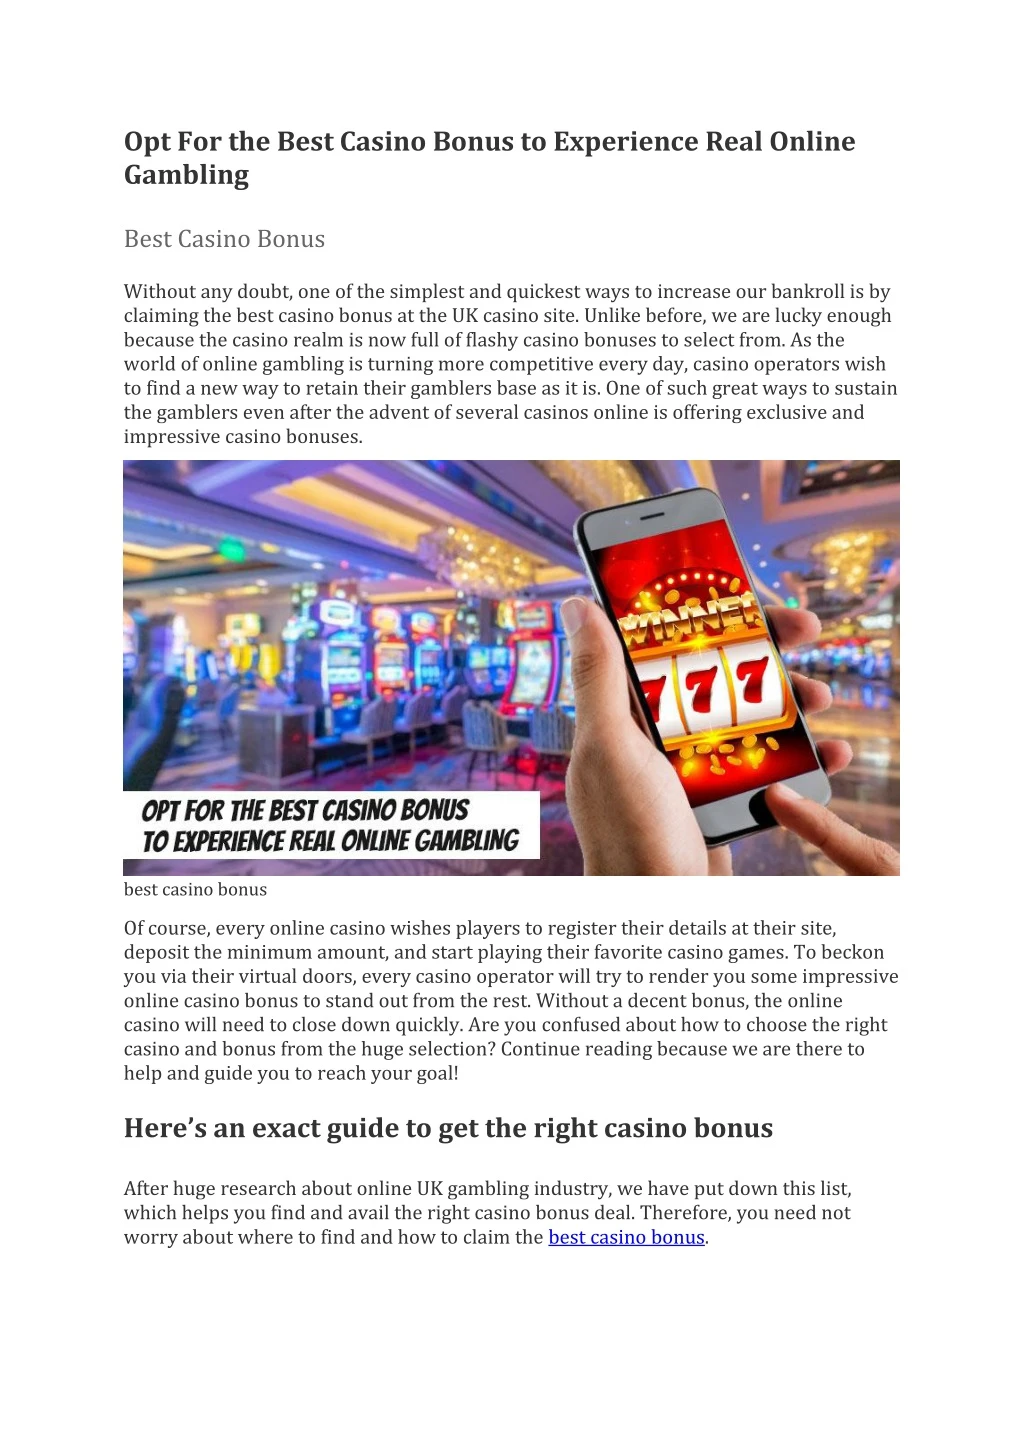 opt for the best casino bonus to experience real